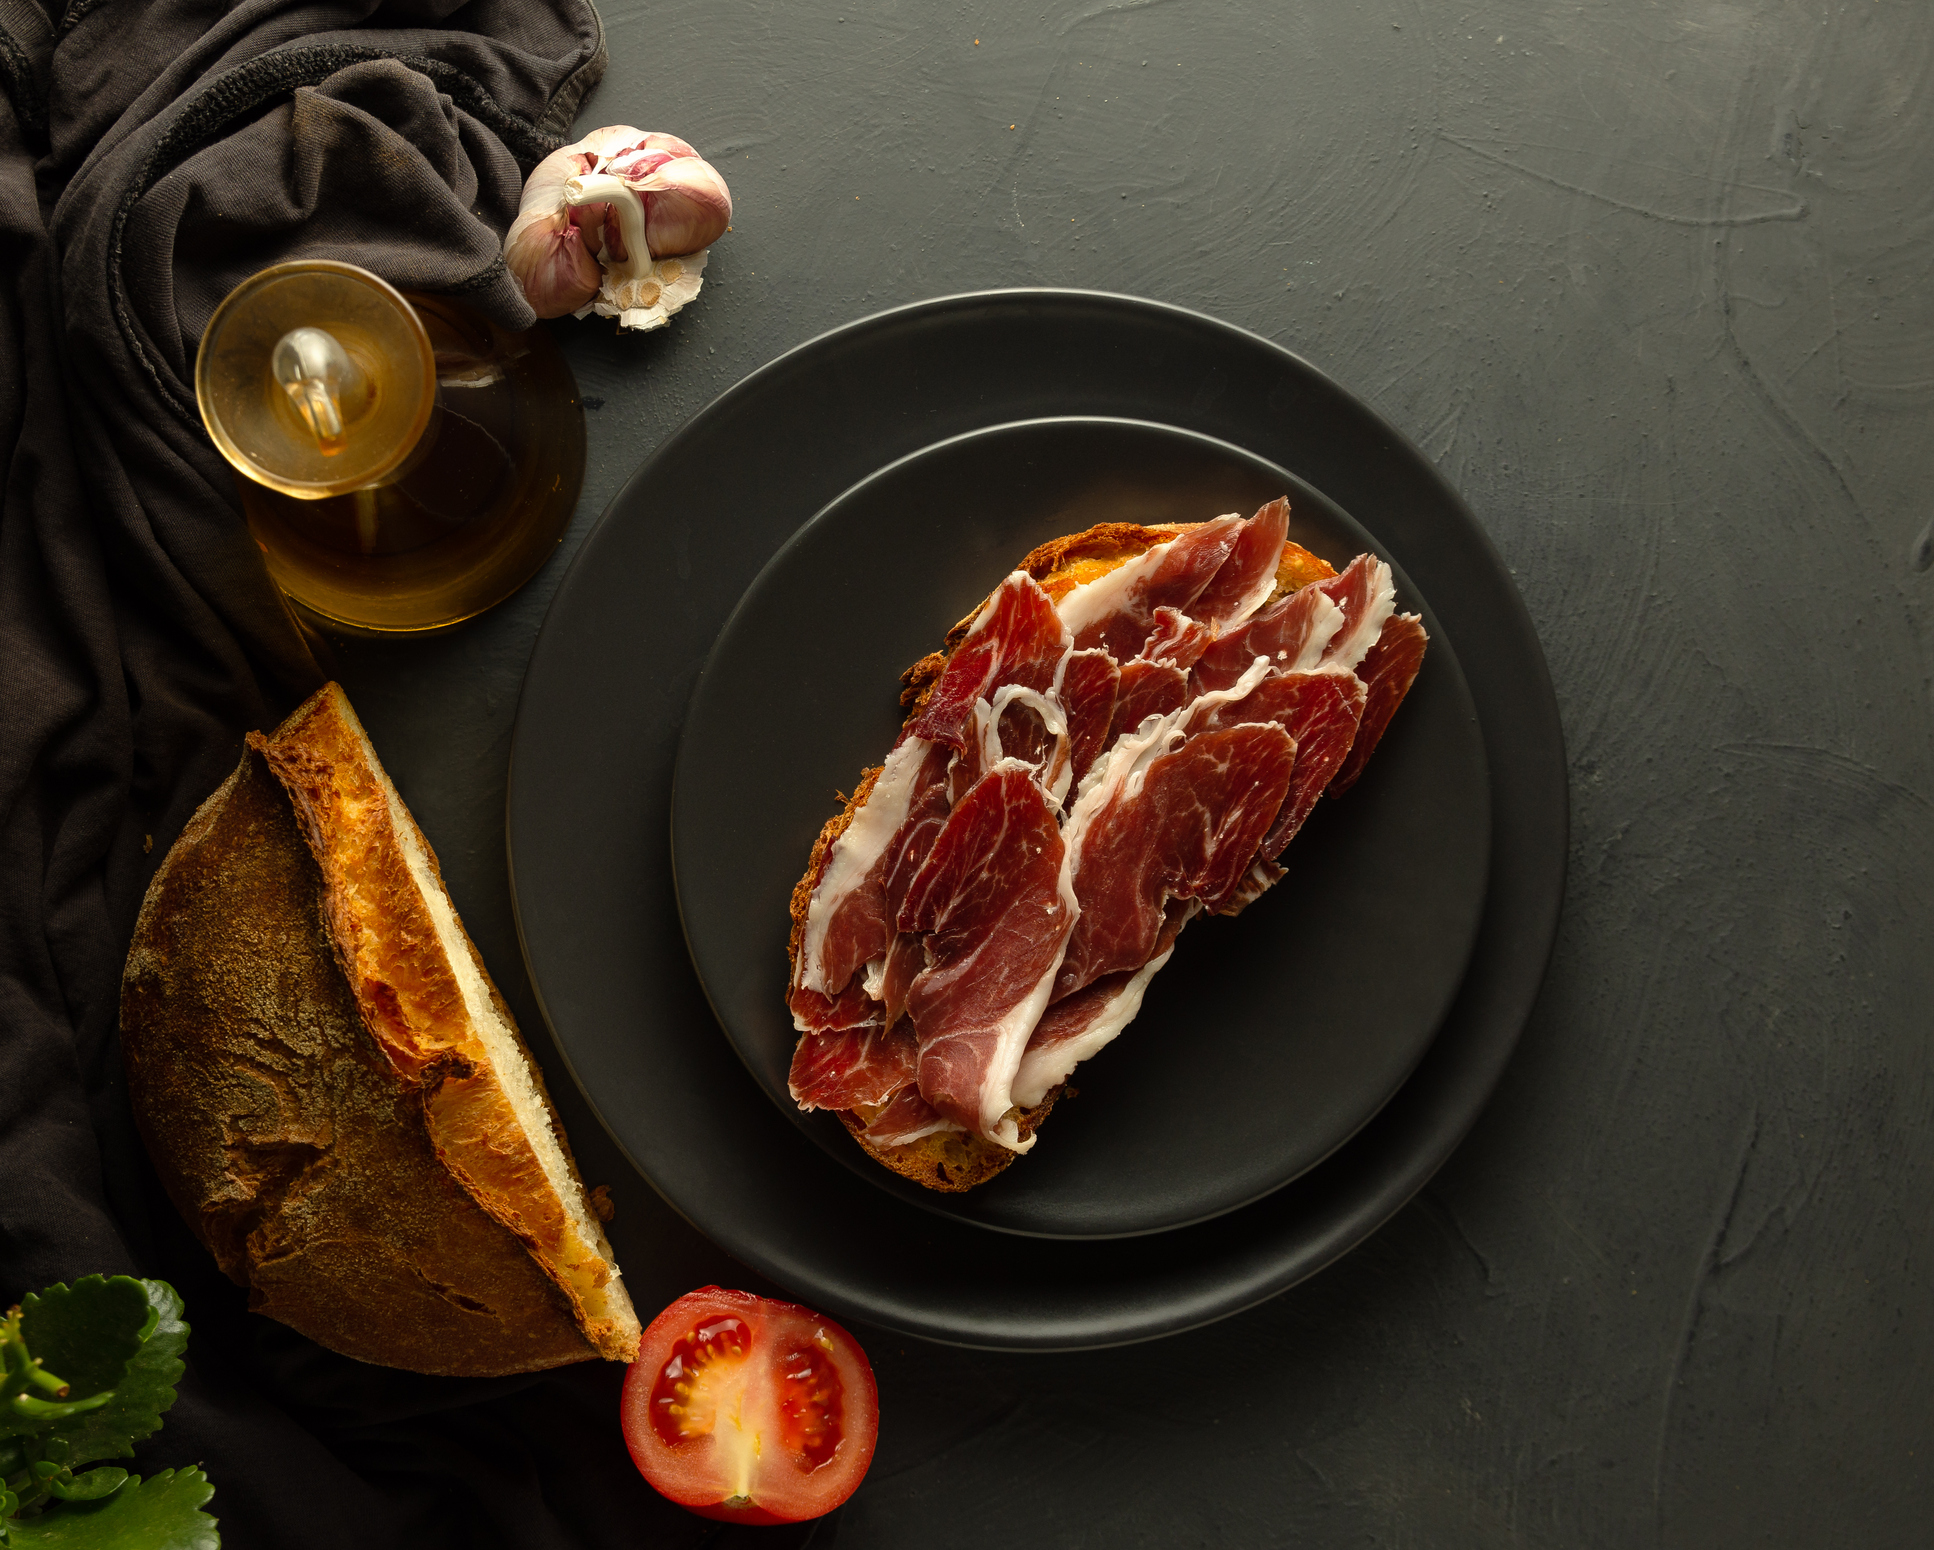 Toasted bread with Iberian ham on black plates and rustic background, in the background artisan bread, fresh tomato and olive oil